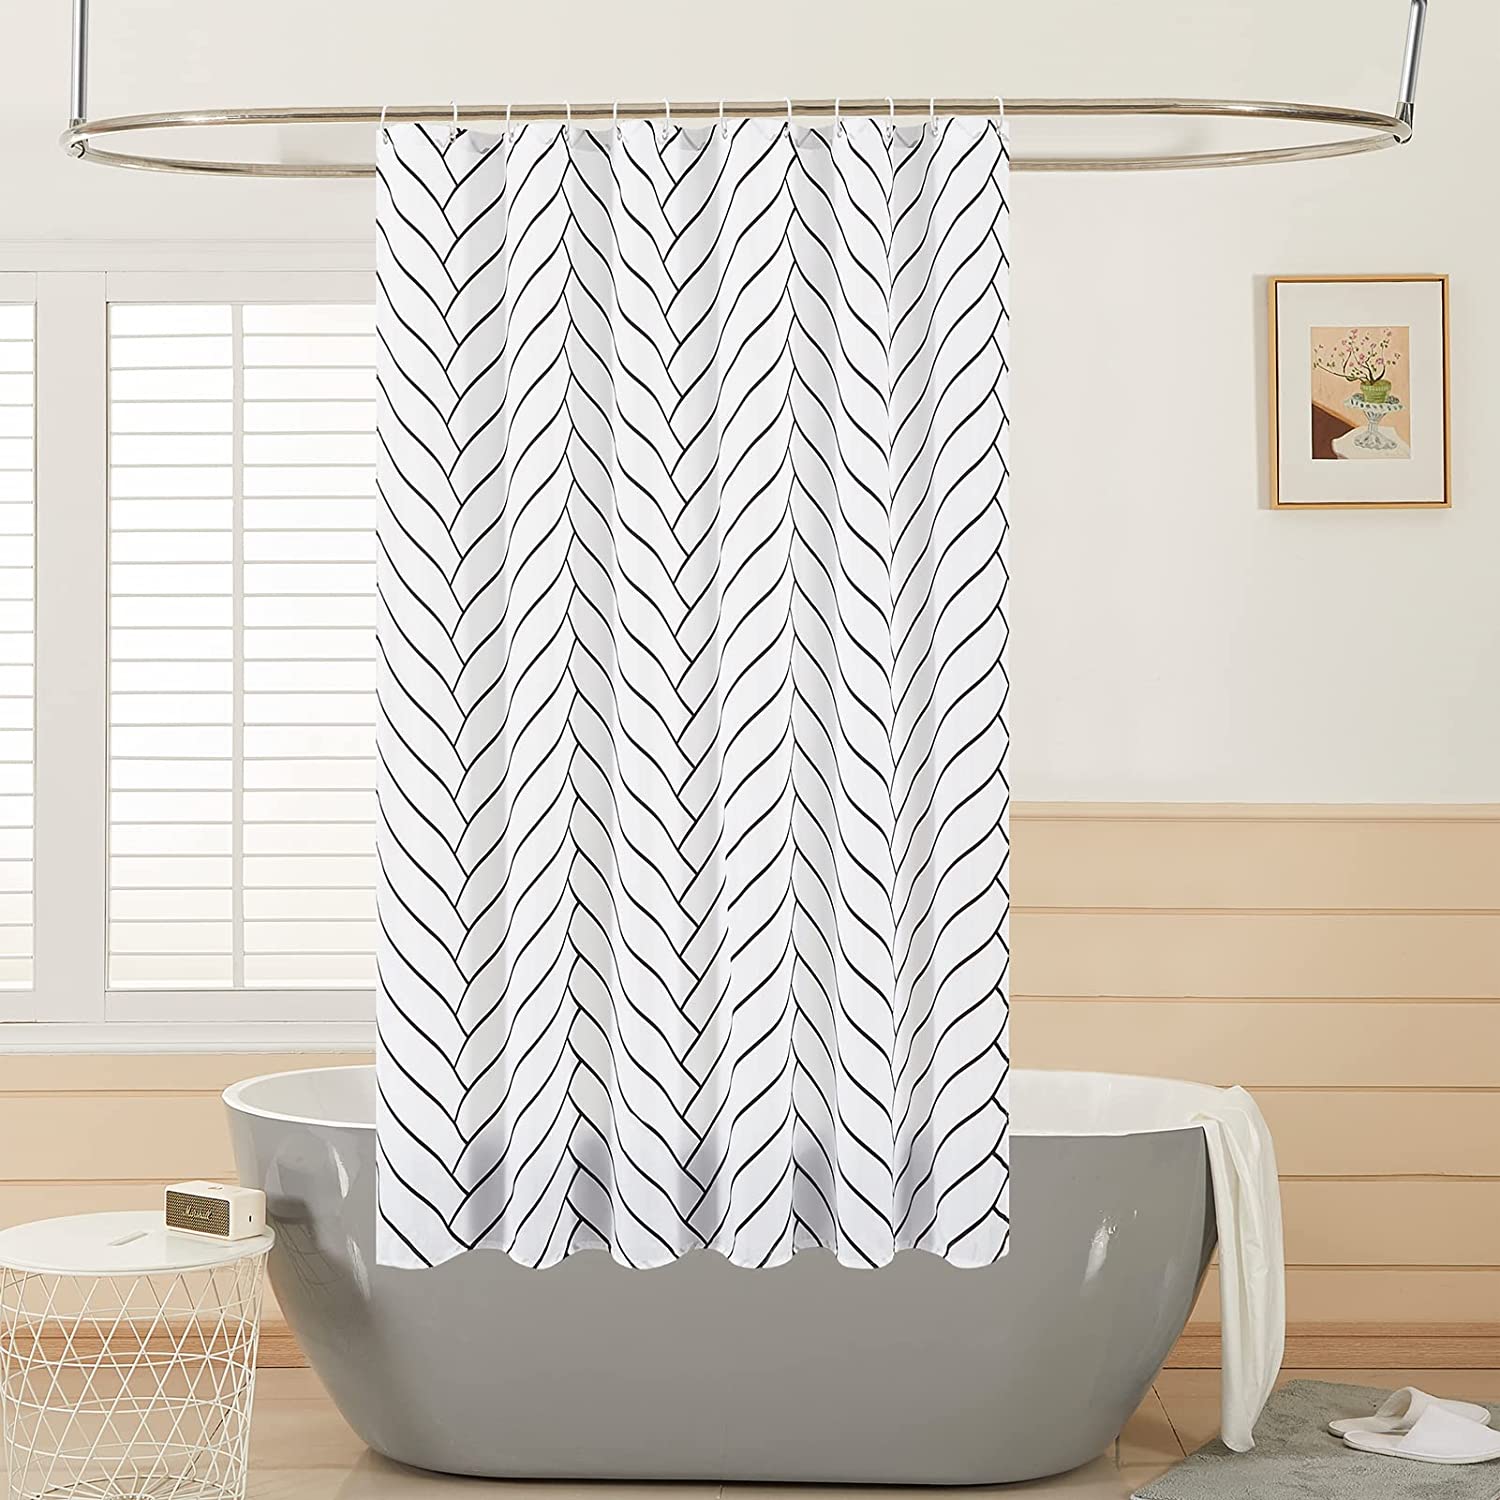 Shower Curtain Striped Style Bathroom Curtains with Metal Grommets